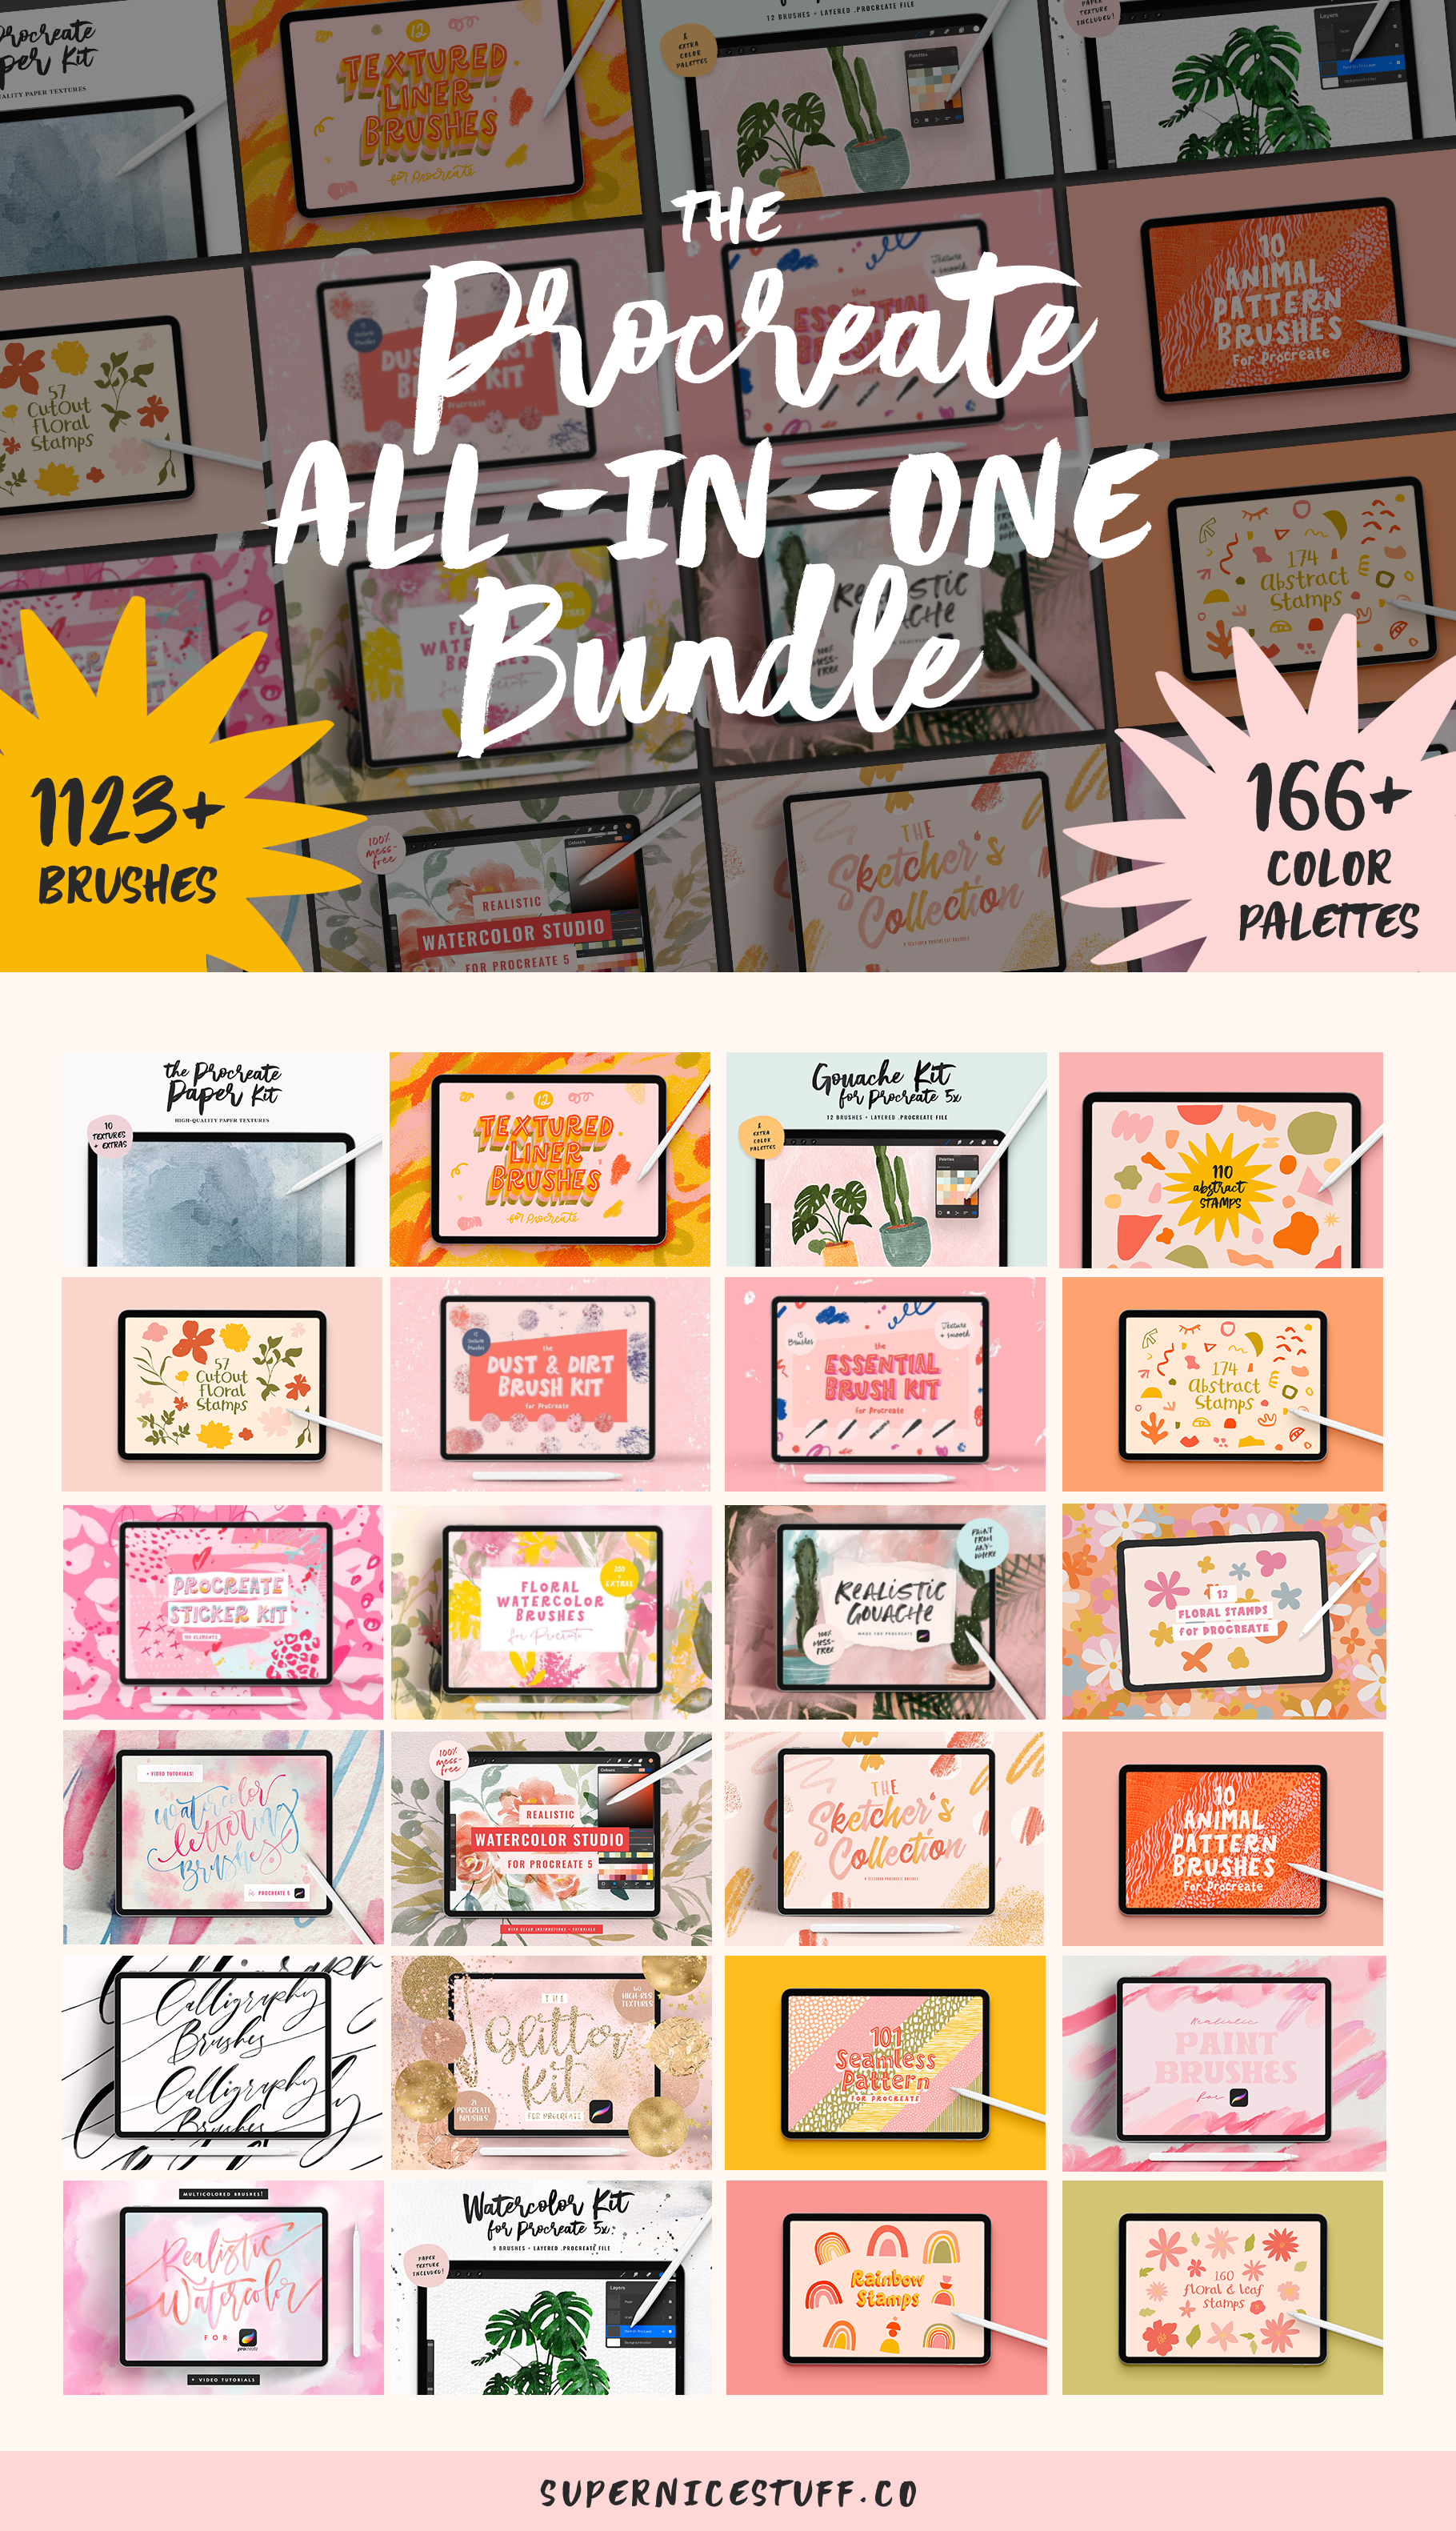 All-In-One Bundle